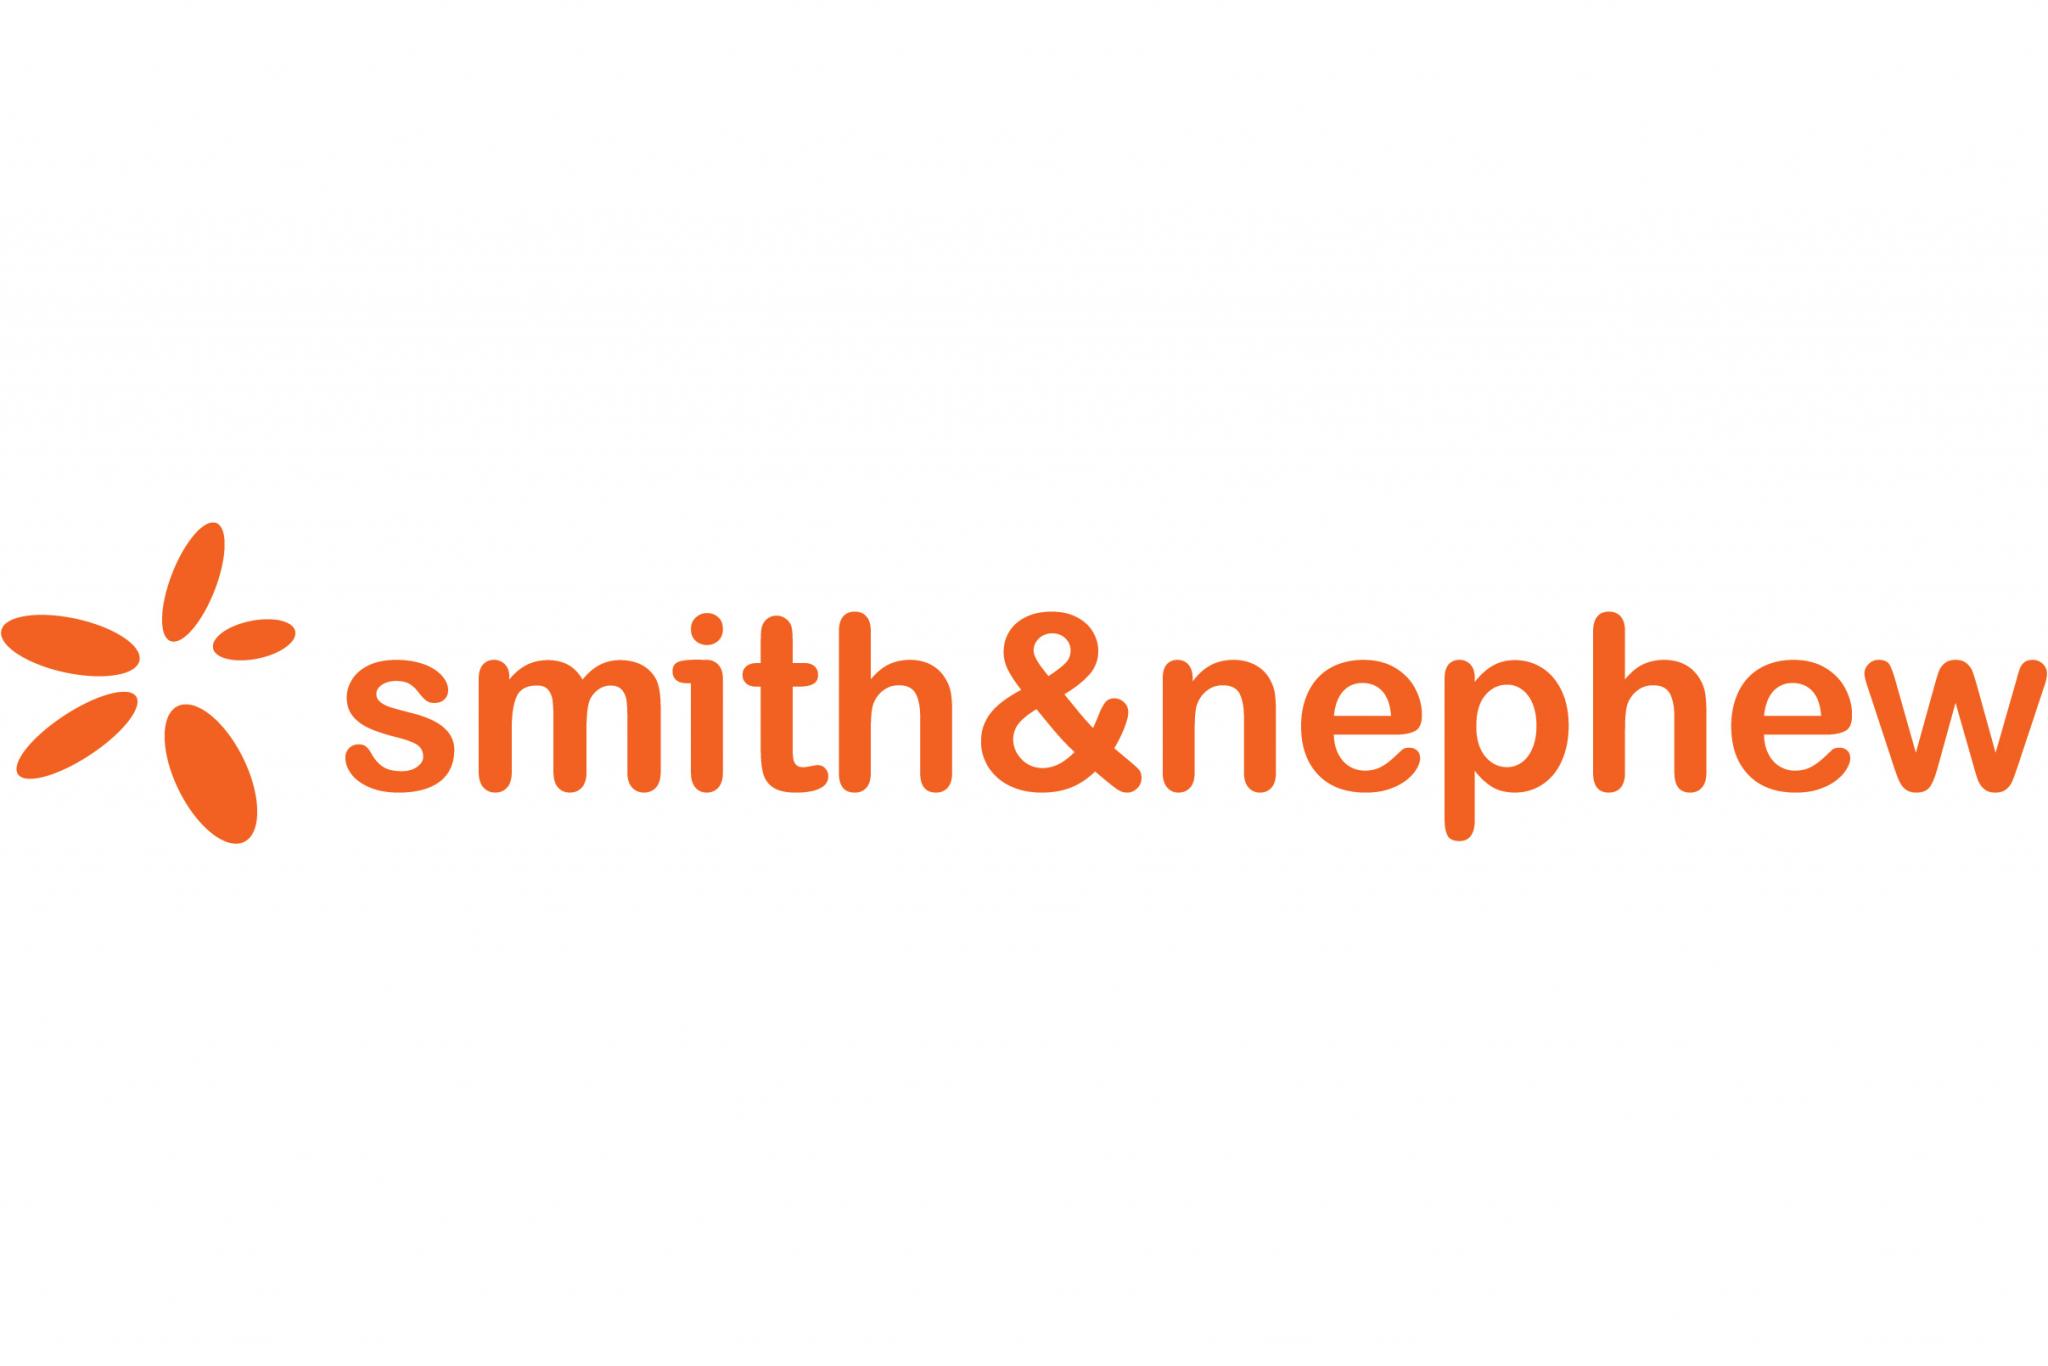 Appeals court nixes Synthes patent in spat with Smith & Nephew